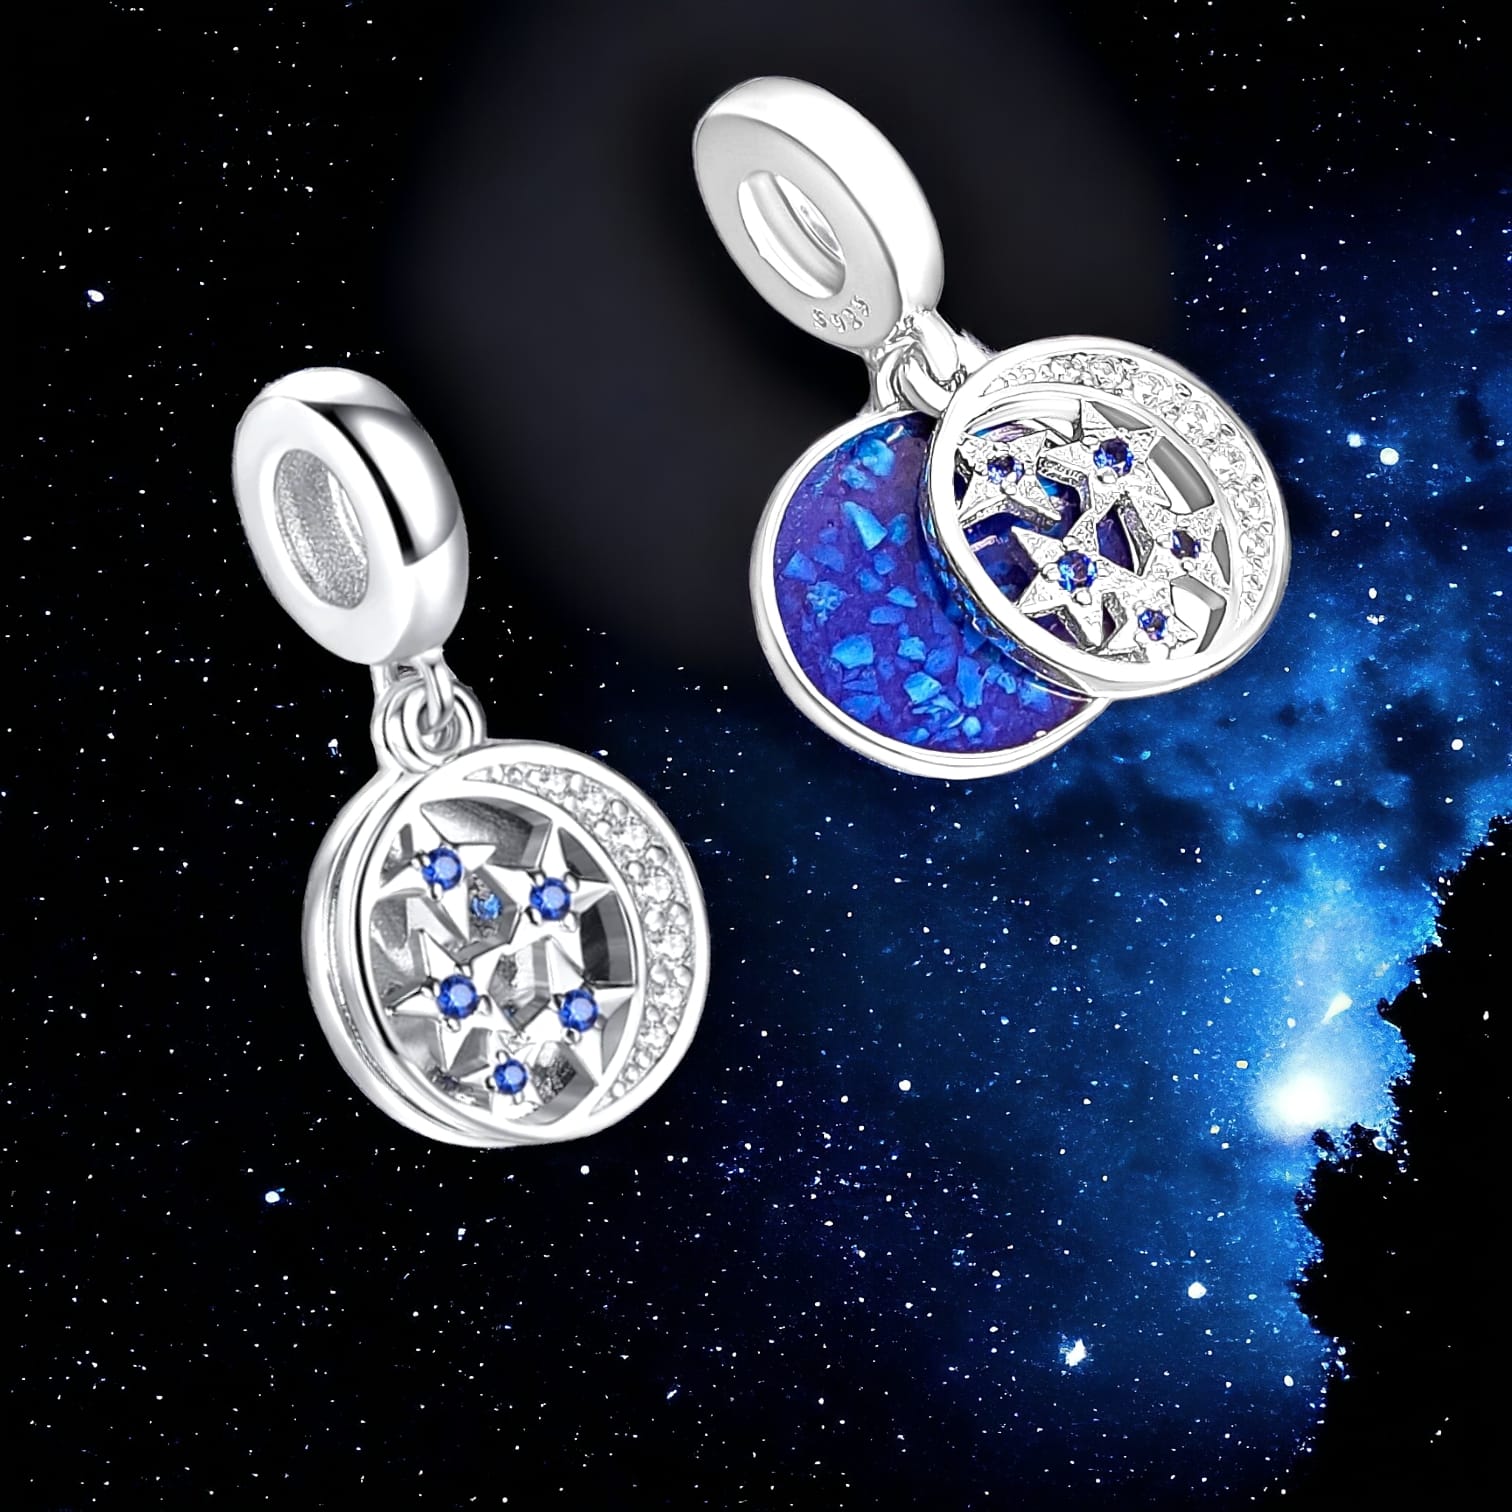 Moon and stars charm for Pandora style bracelet - 3 weeks special introductory price